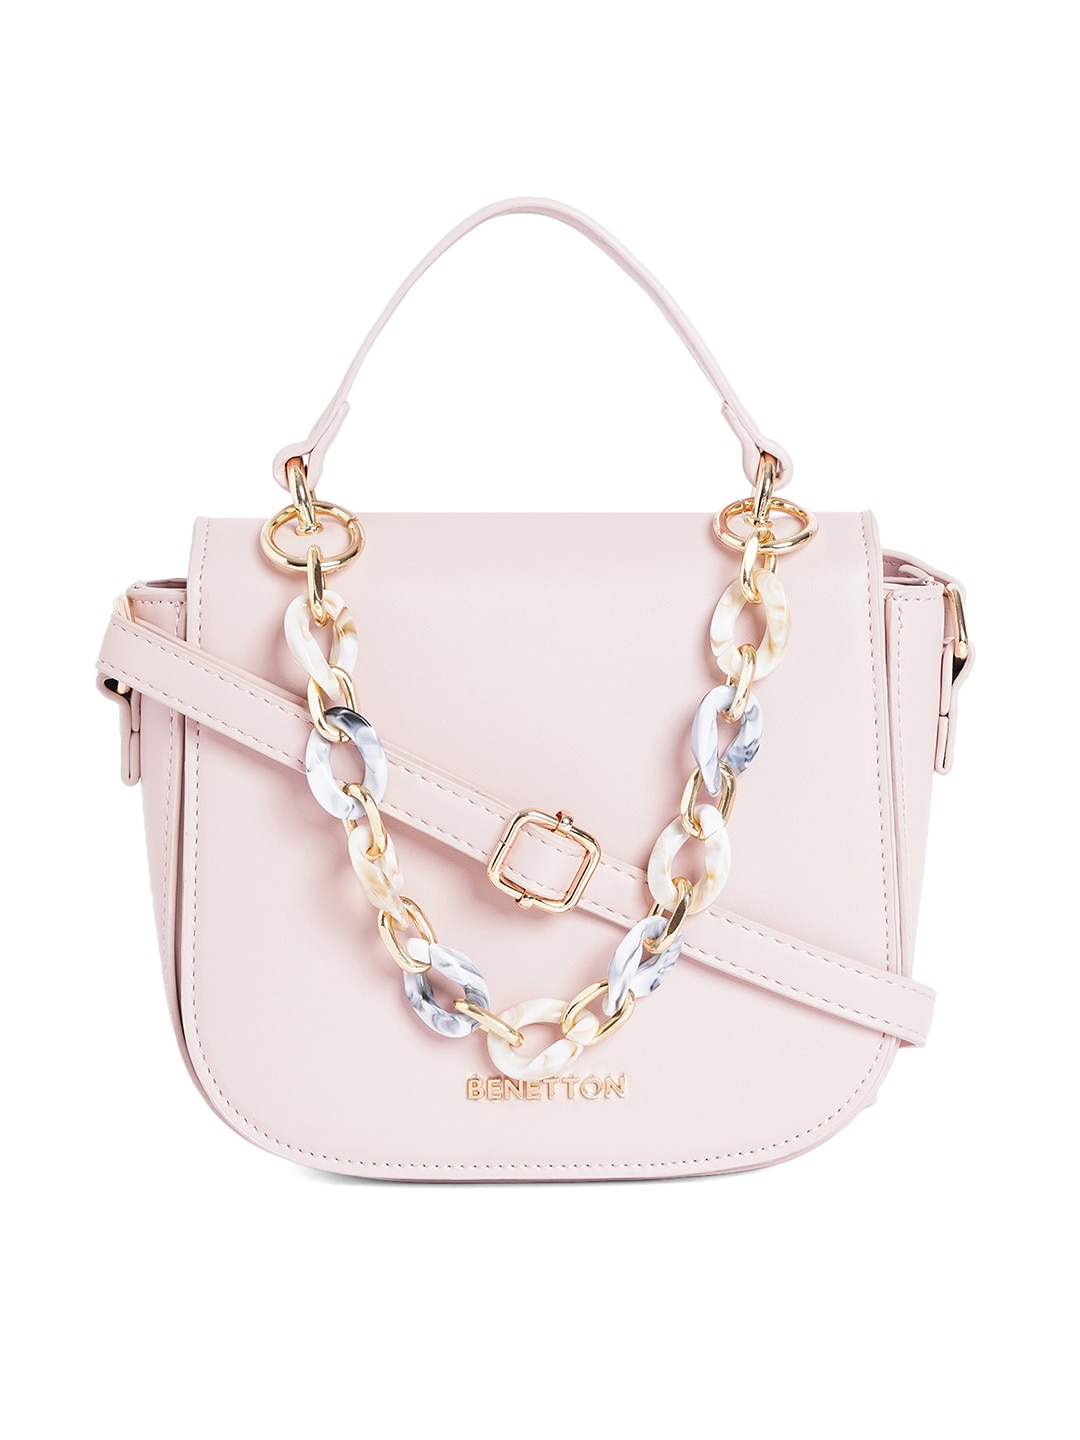 United Colors of Benetton Pink Structured Handheld Bag Price in India